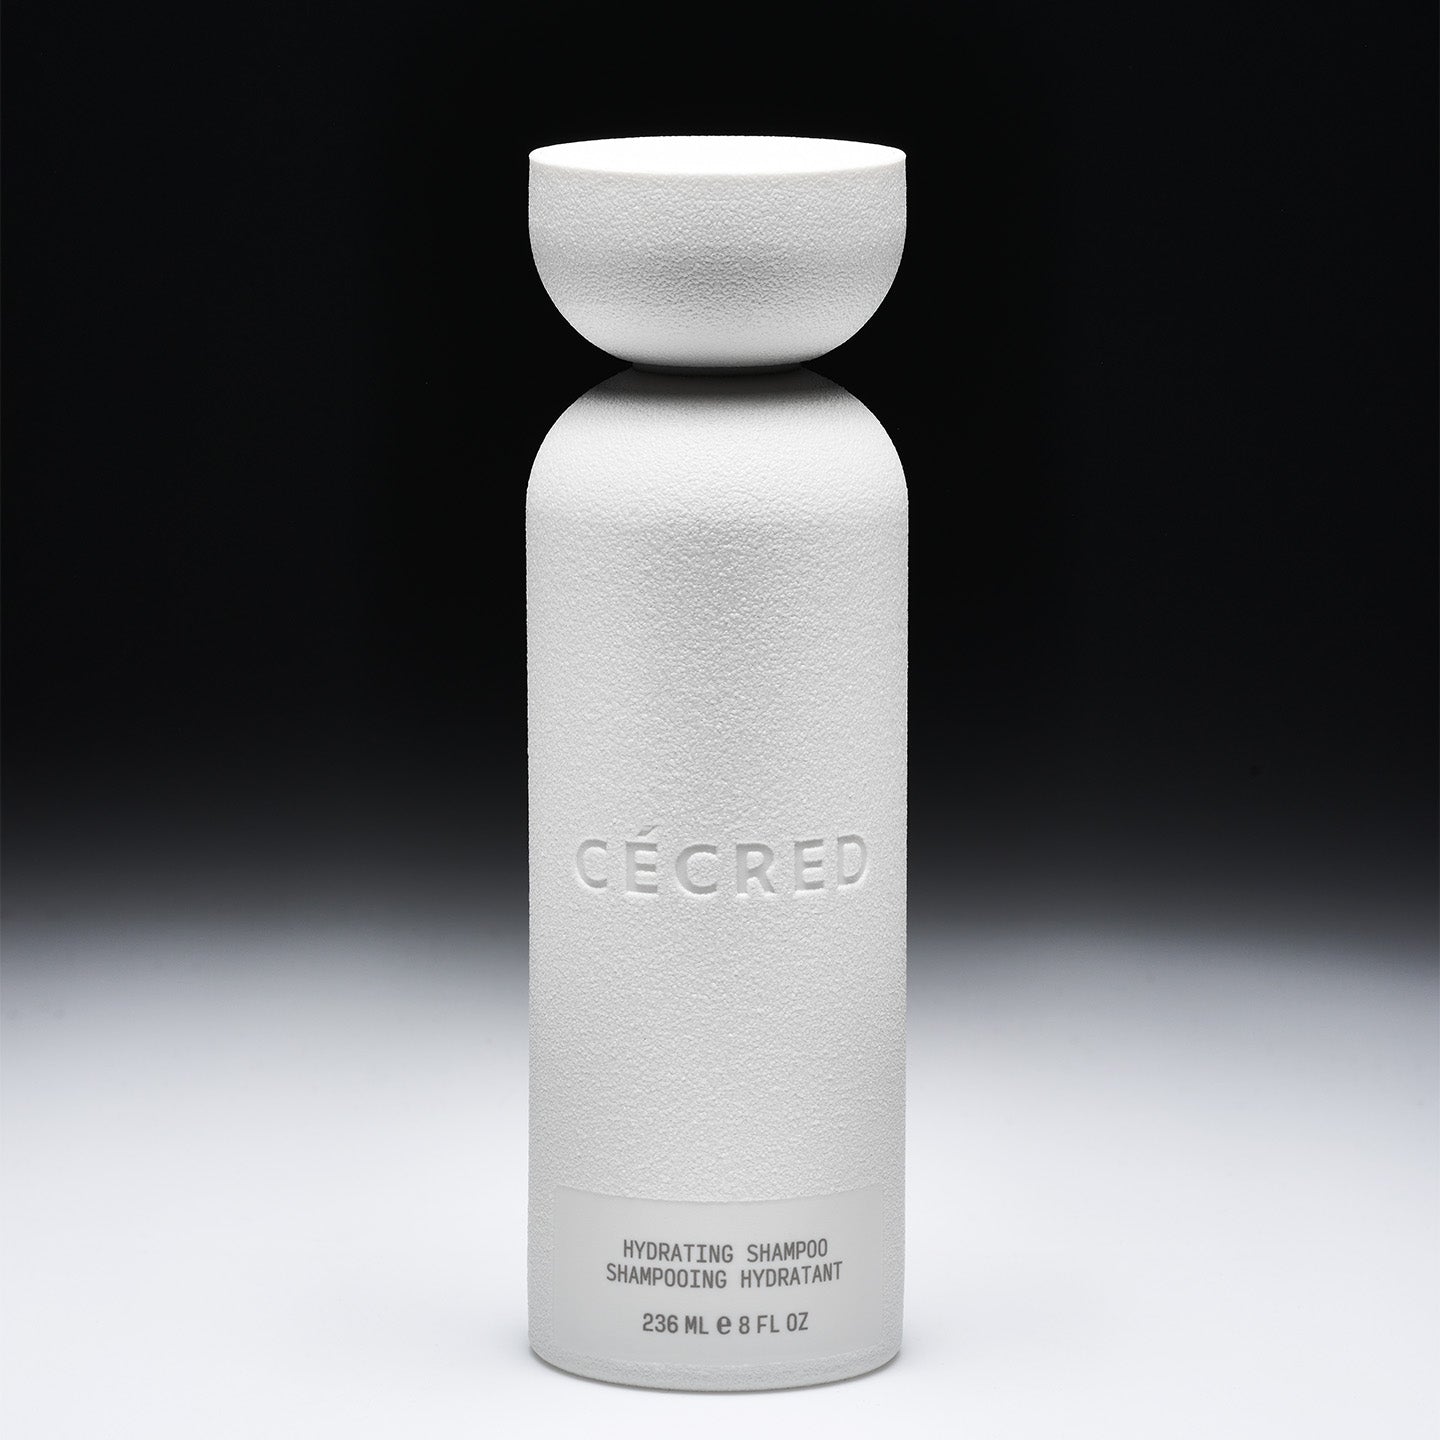 Hydrating Shampoo for Dry Hair | Cécred